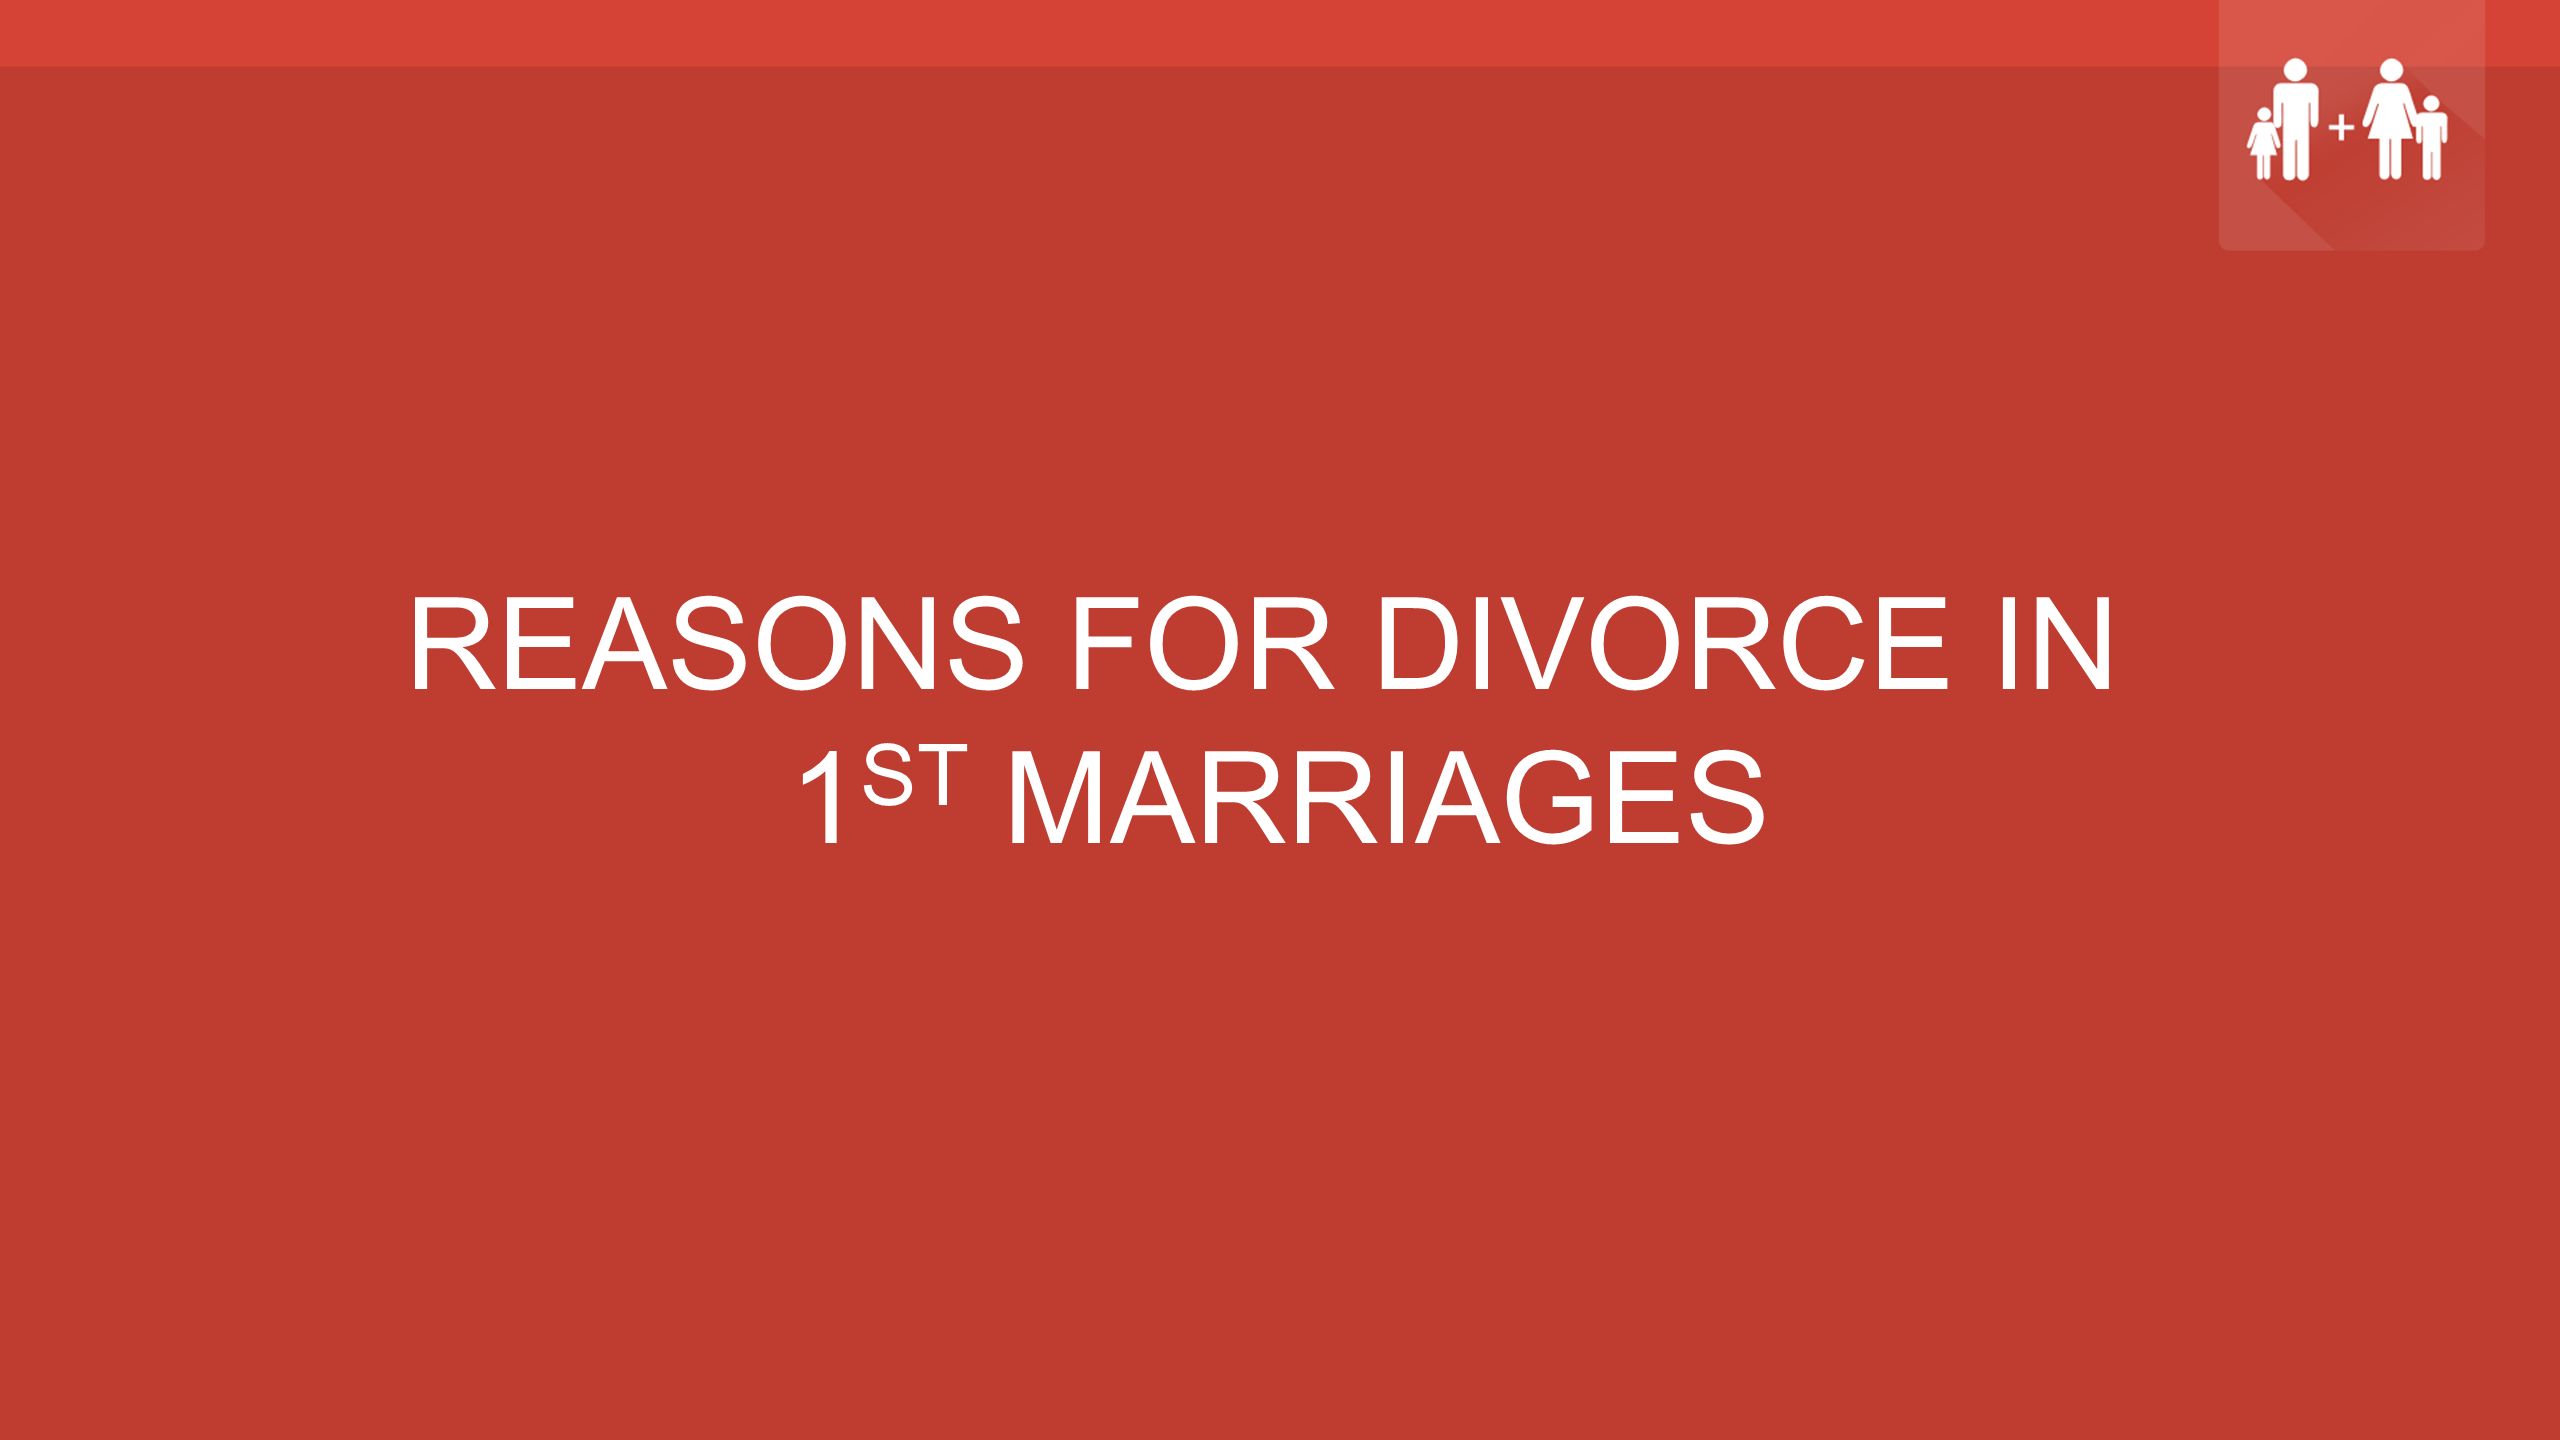 REASONS FOR DIVORCE IN 1 ST MARRIAGES